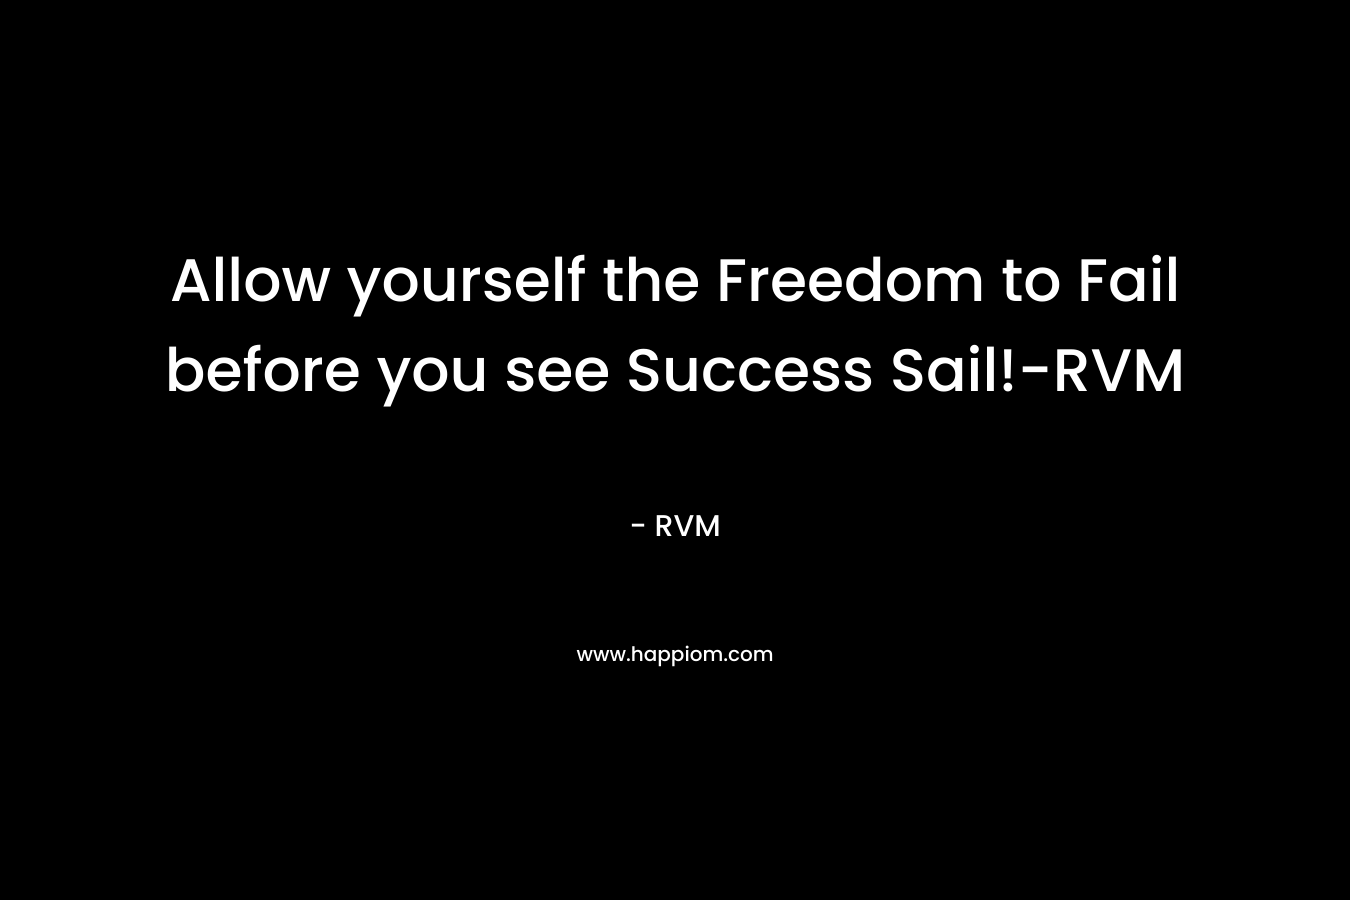 Allow yourself the Freedom to Fail before you see Success Sail!-RVM